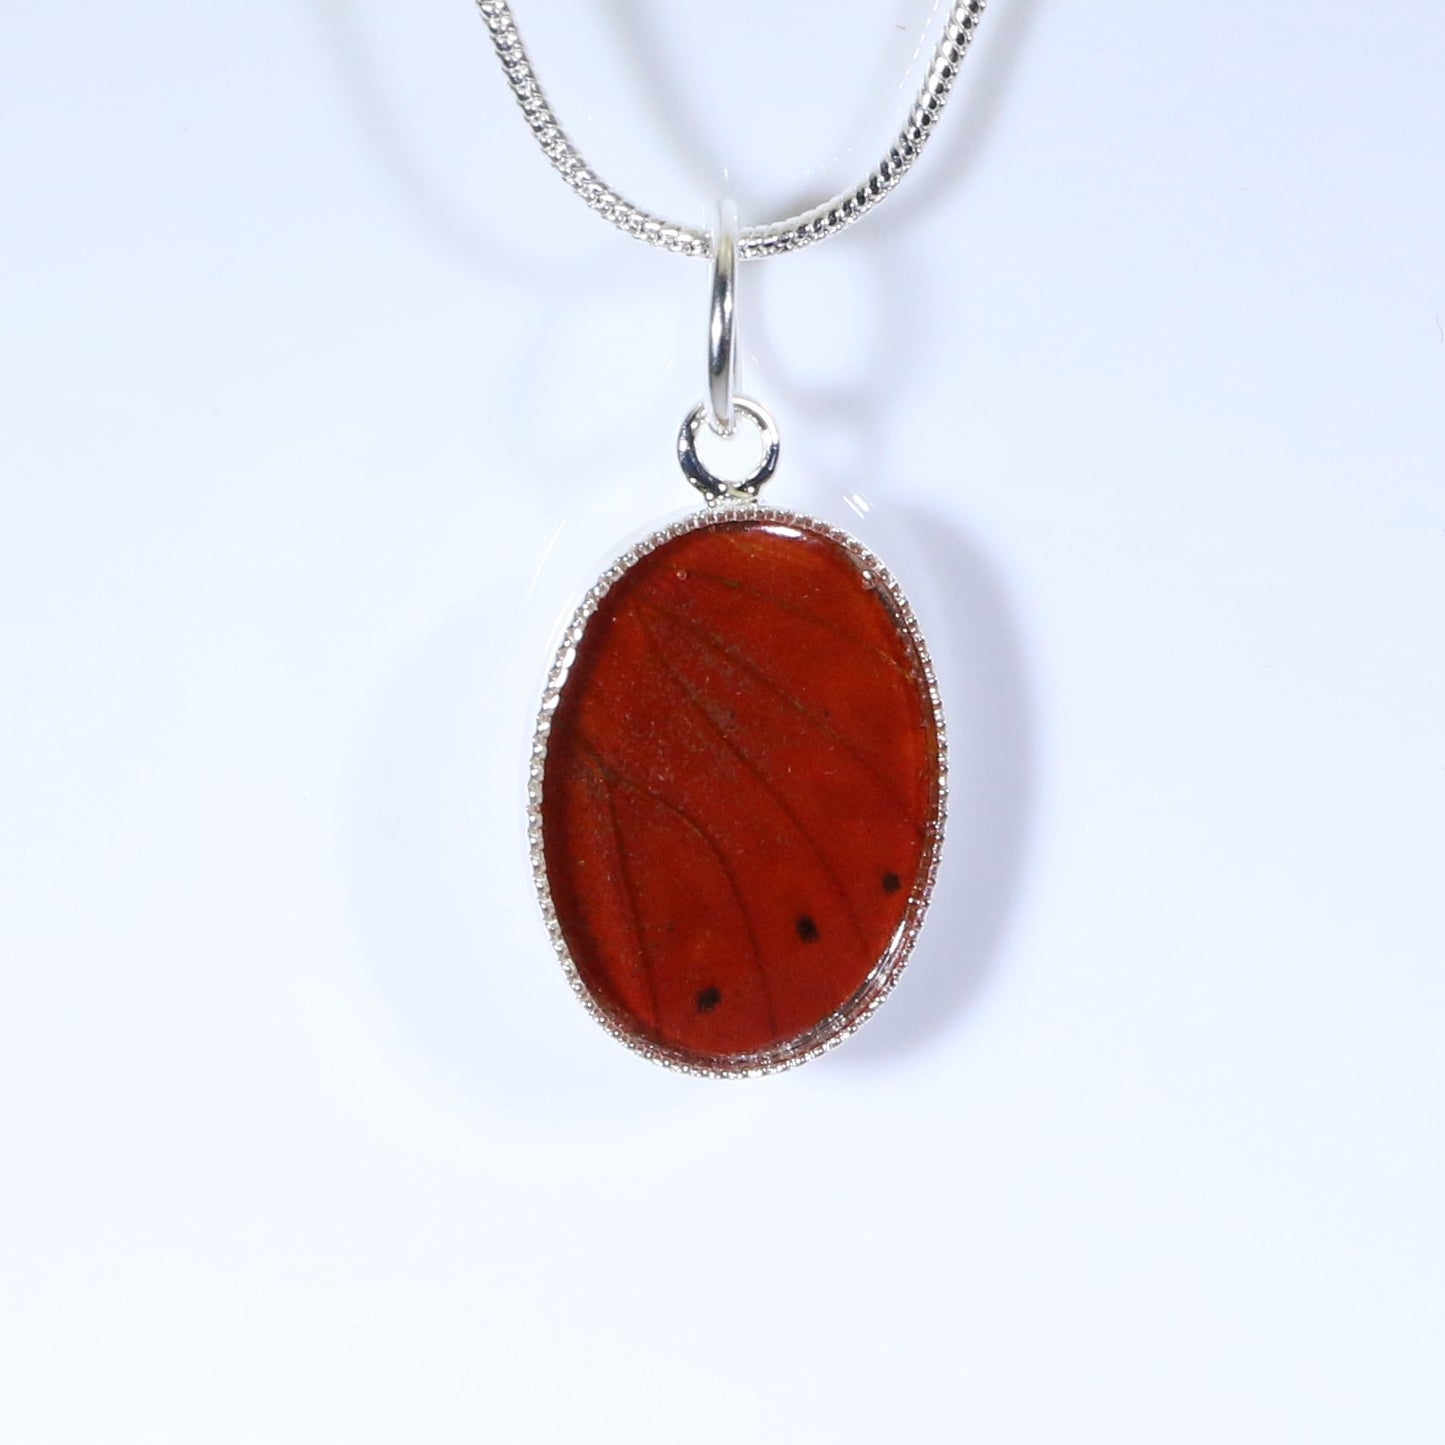 52008 - Real Butterfly Wing Jewelry - Pendant Collection - Red Glider Butterfly